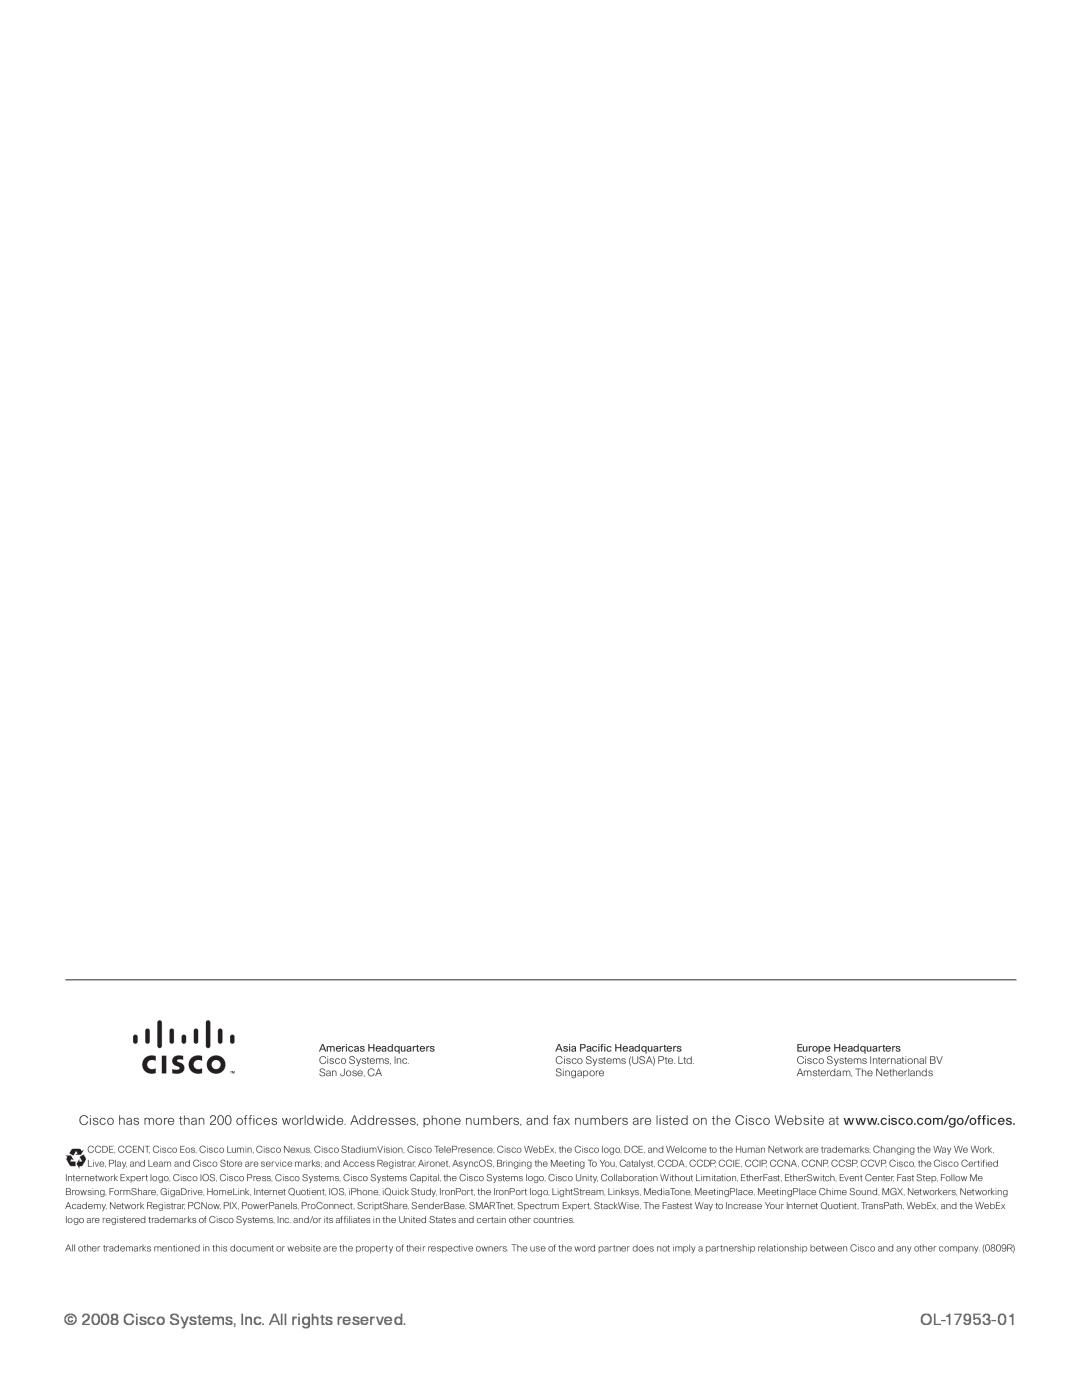 Cisco Systems NSS2000 Series manual Cisco Systems, Inc. All rights reserved, OL-17953-01 